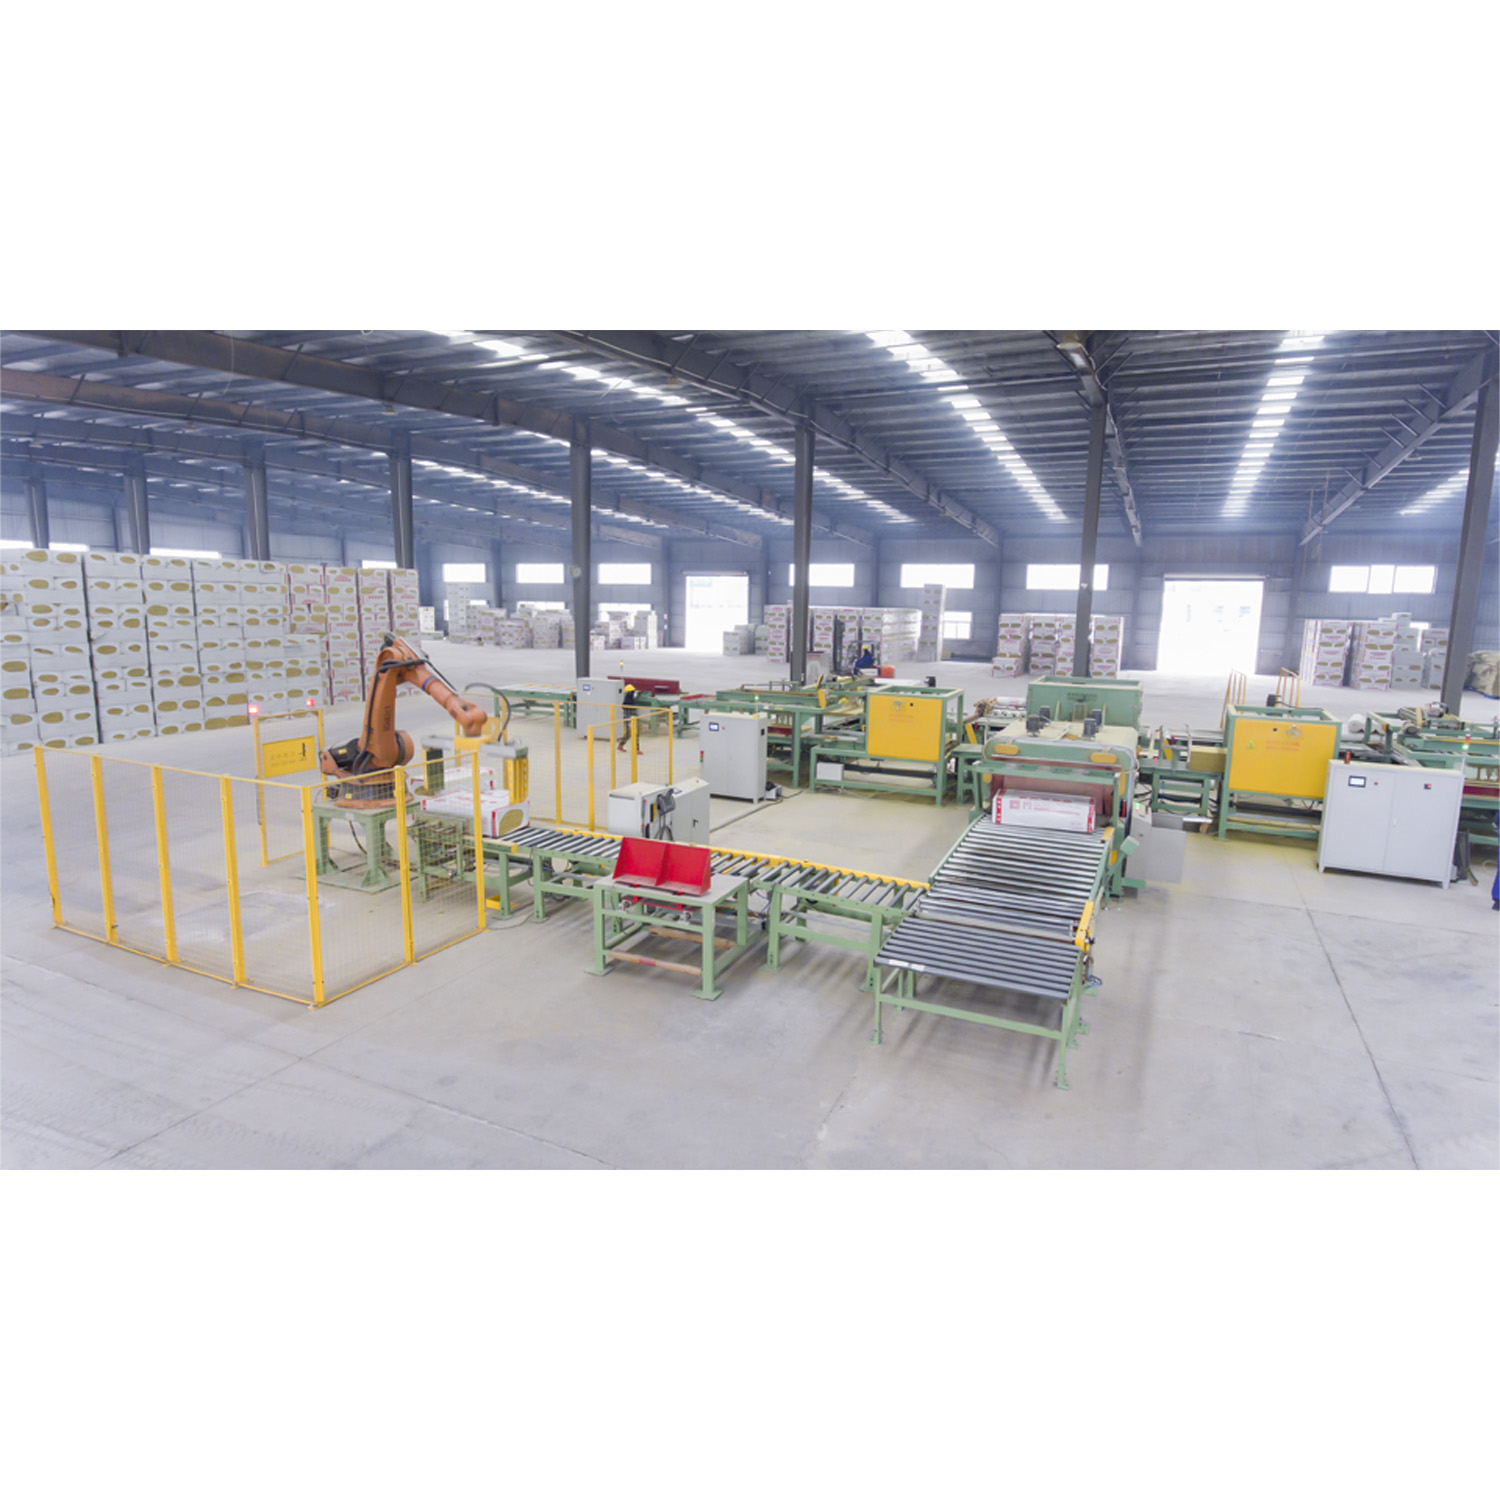 30000t/y capacity rock wool production line in Anhui province